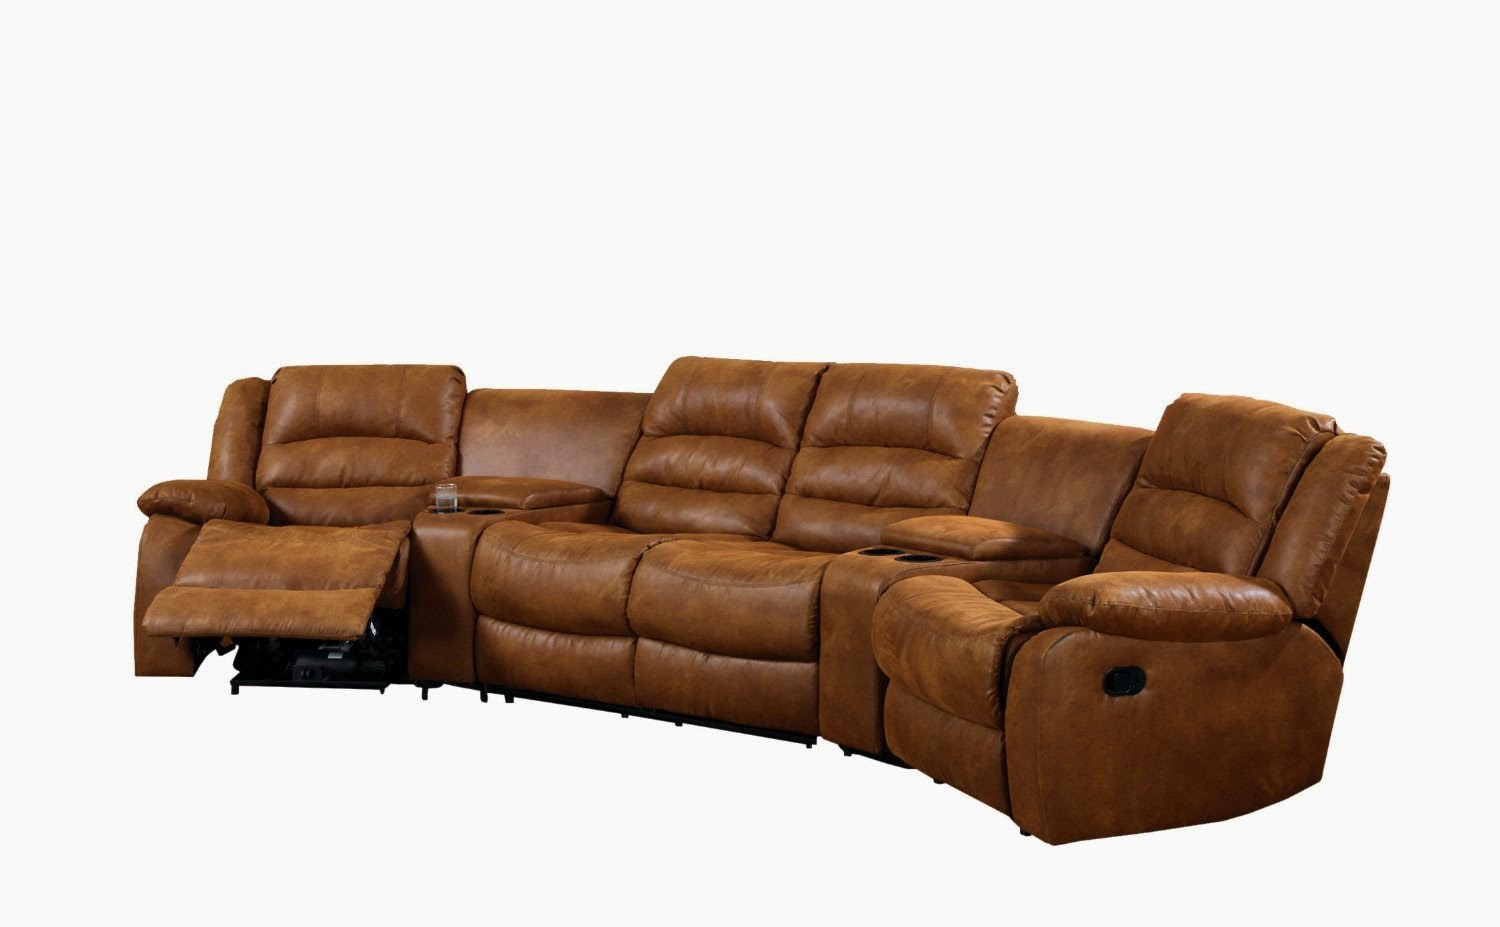 curved leather sofa lounge chair